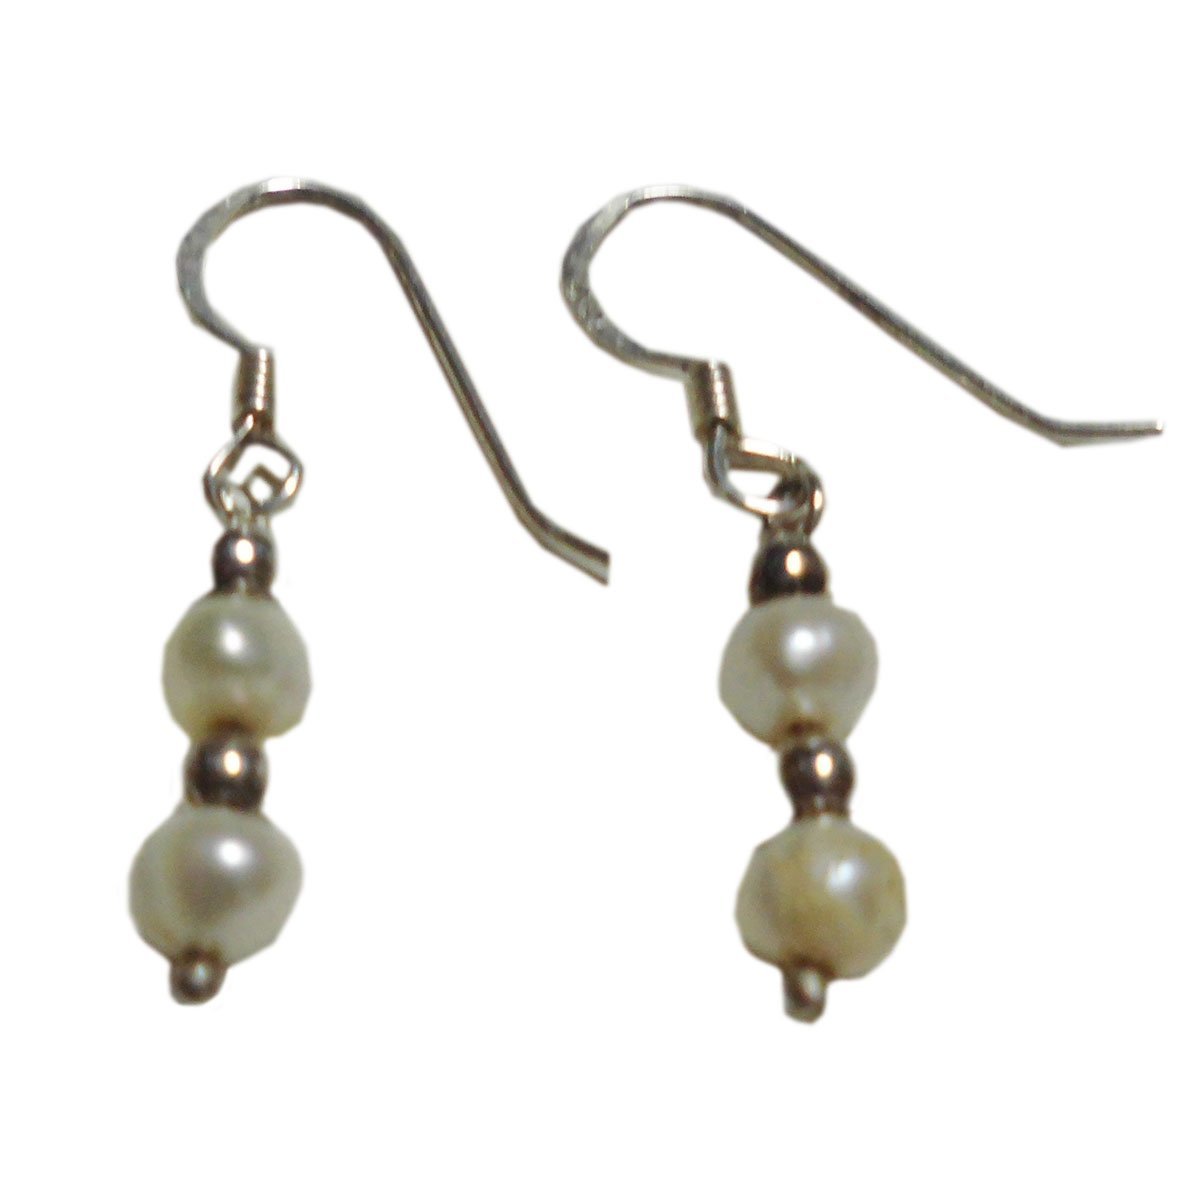 ■☆Handmade accessories Silver earrings with freshwater pearls (HDP-7), Earrings, pearl, Freshwater pearls